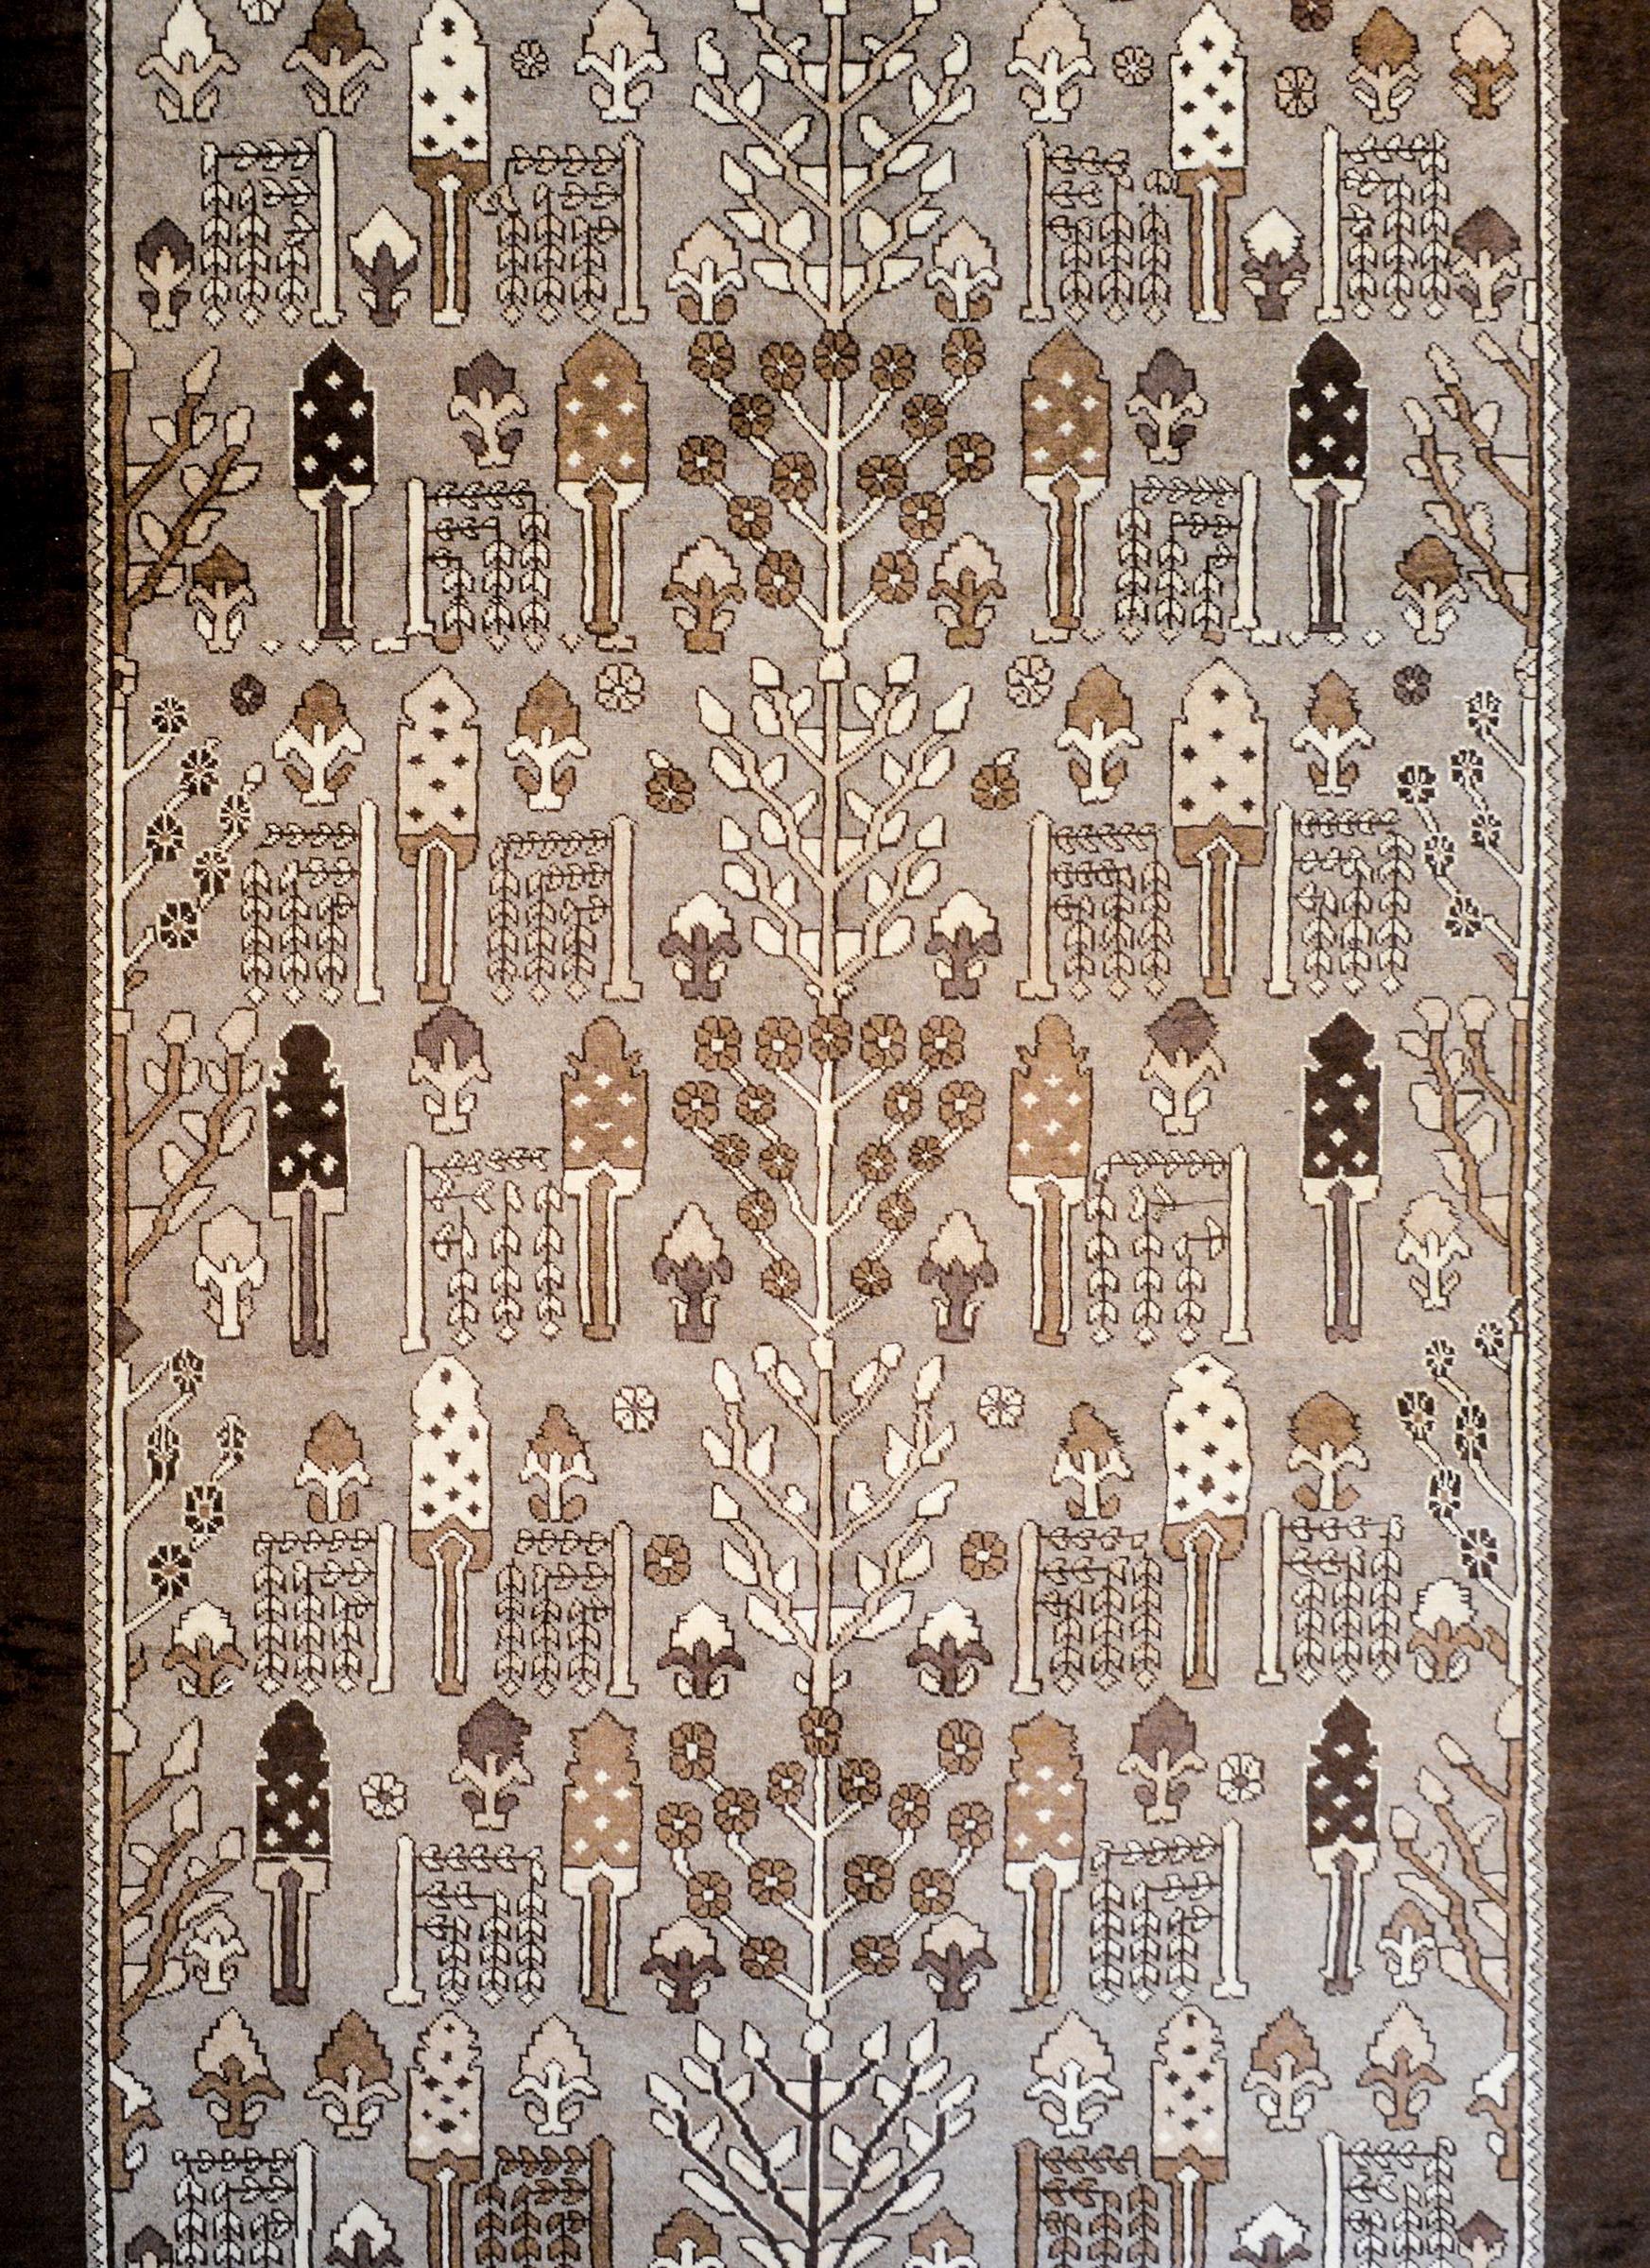 A beautiful vintage, mid-20th century, Persian Bakhtiari rug with a garden pattern consisting of myriad trees, shrubs, and flowering vines, all woven in natural, un-dyed, brown, grey, and beige colored wool.